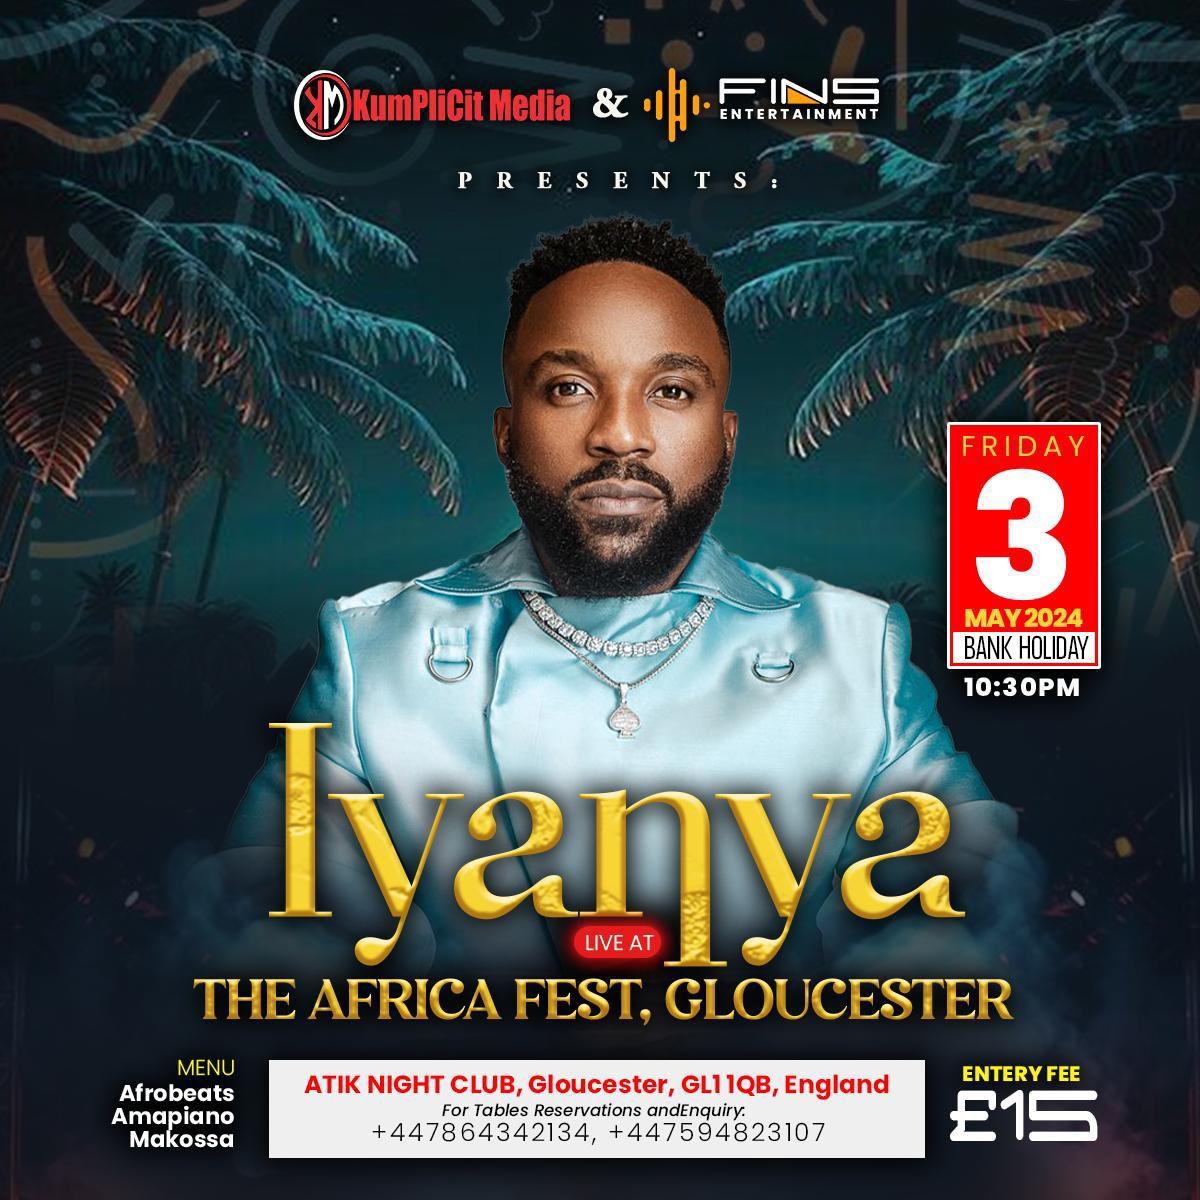 THE AFRICA FEST WITH IYANYA